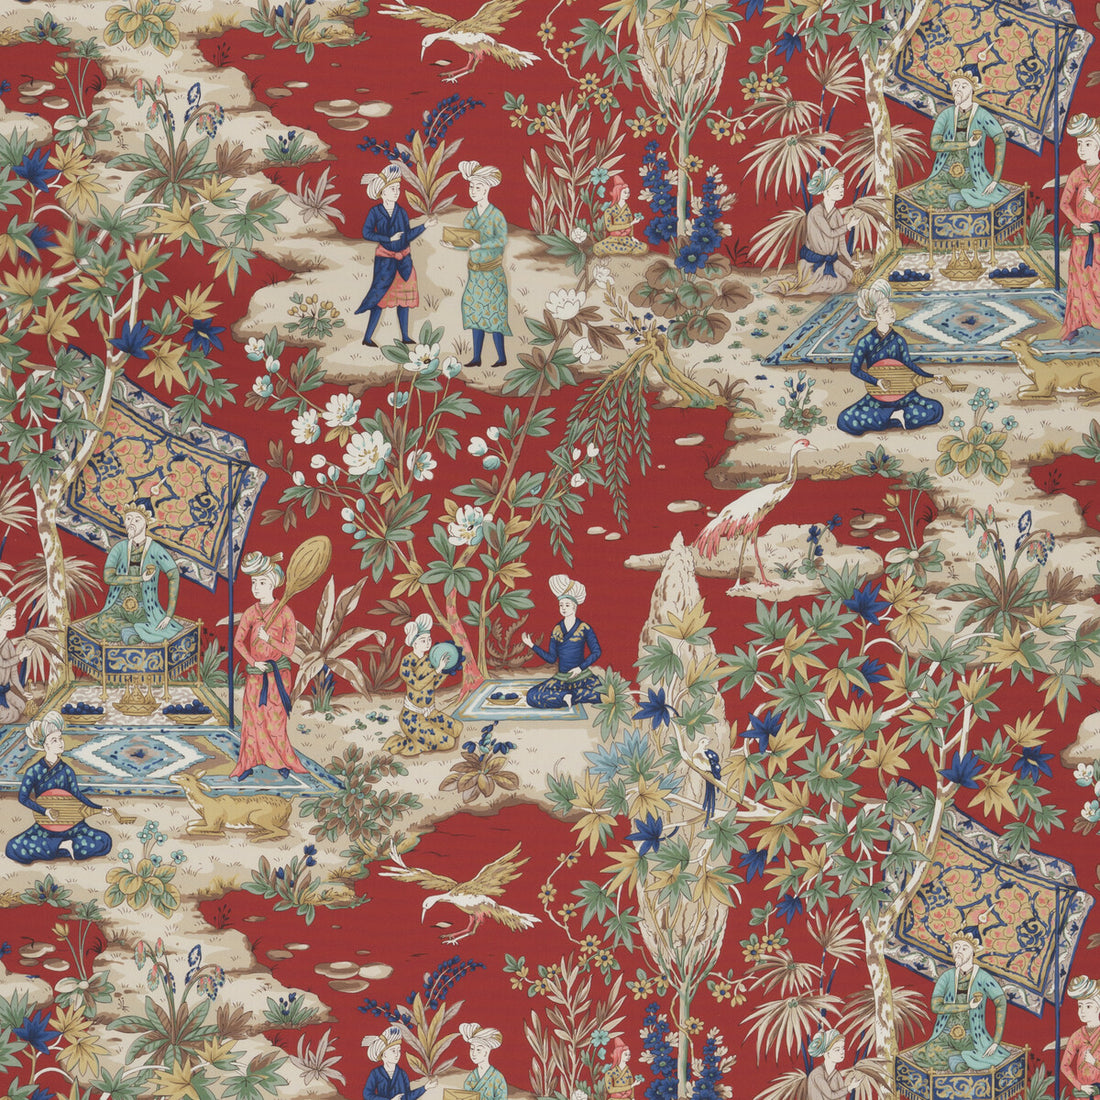 Lodi Garden Print fabric in red color - pattern 8018119.19.0 - by Brunschwig &amp; Fils in the Baret collection